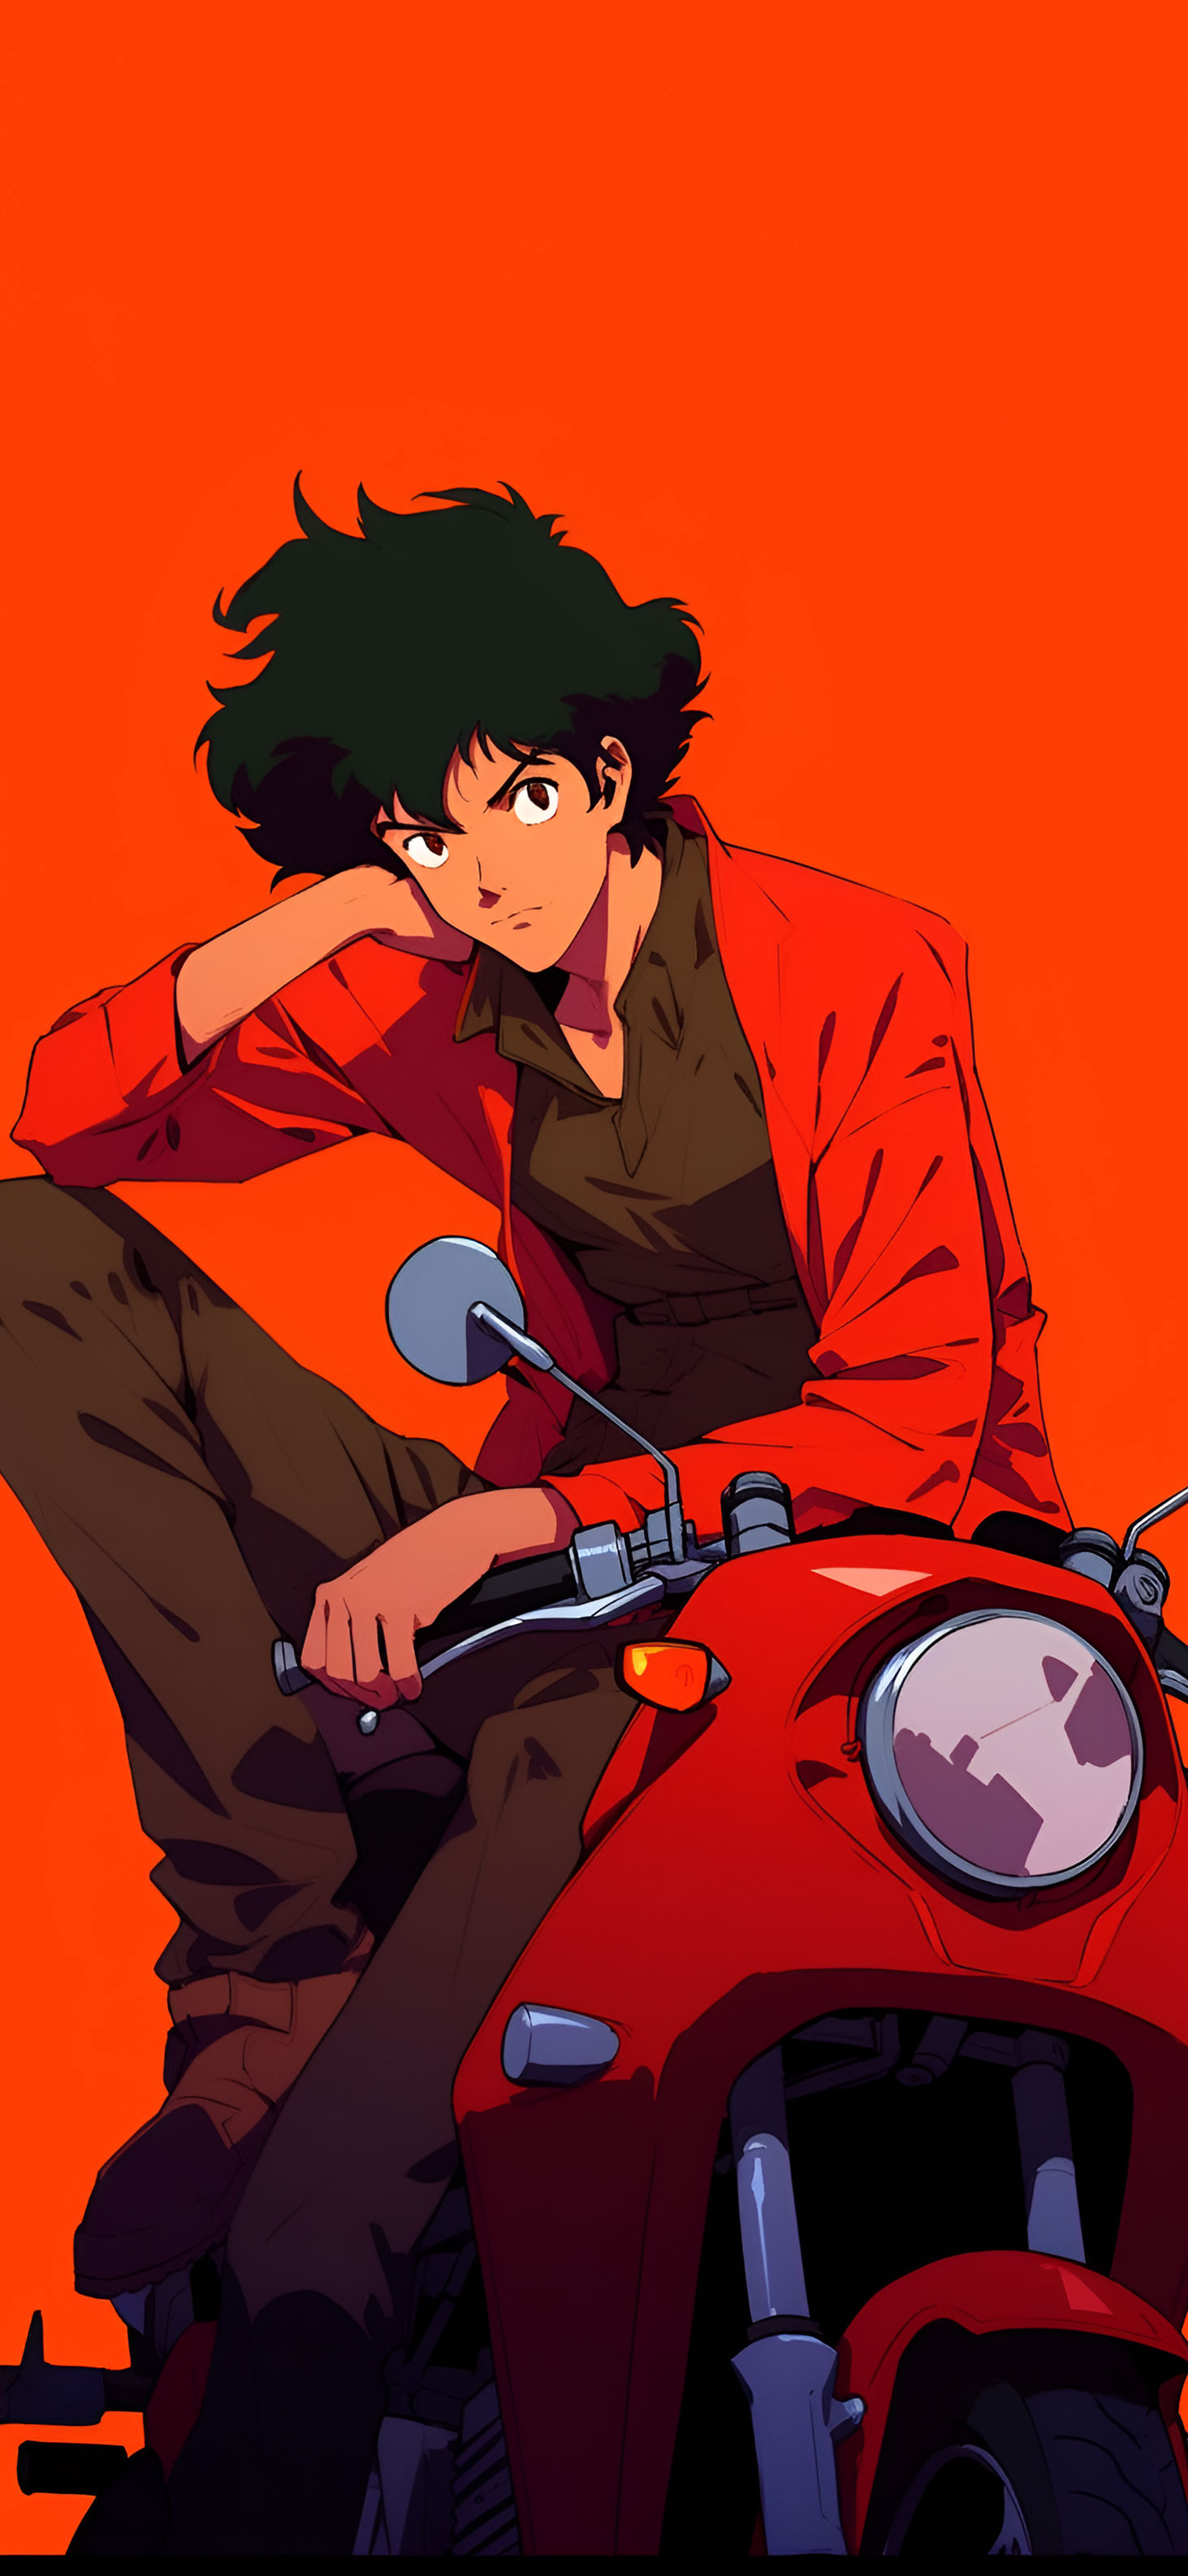 Cowboy Bebop Spike Spiegel on Motorcycle Wallpapers for iPhone